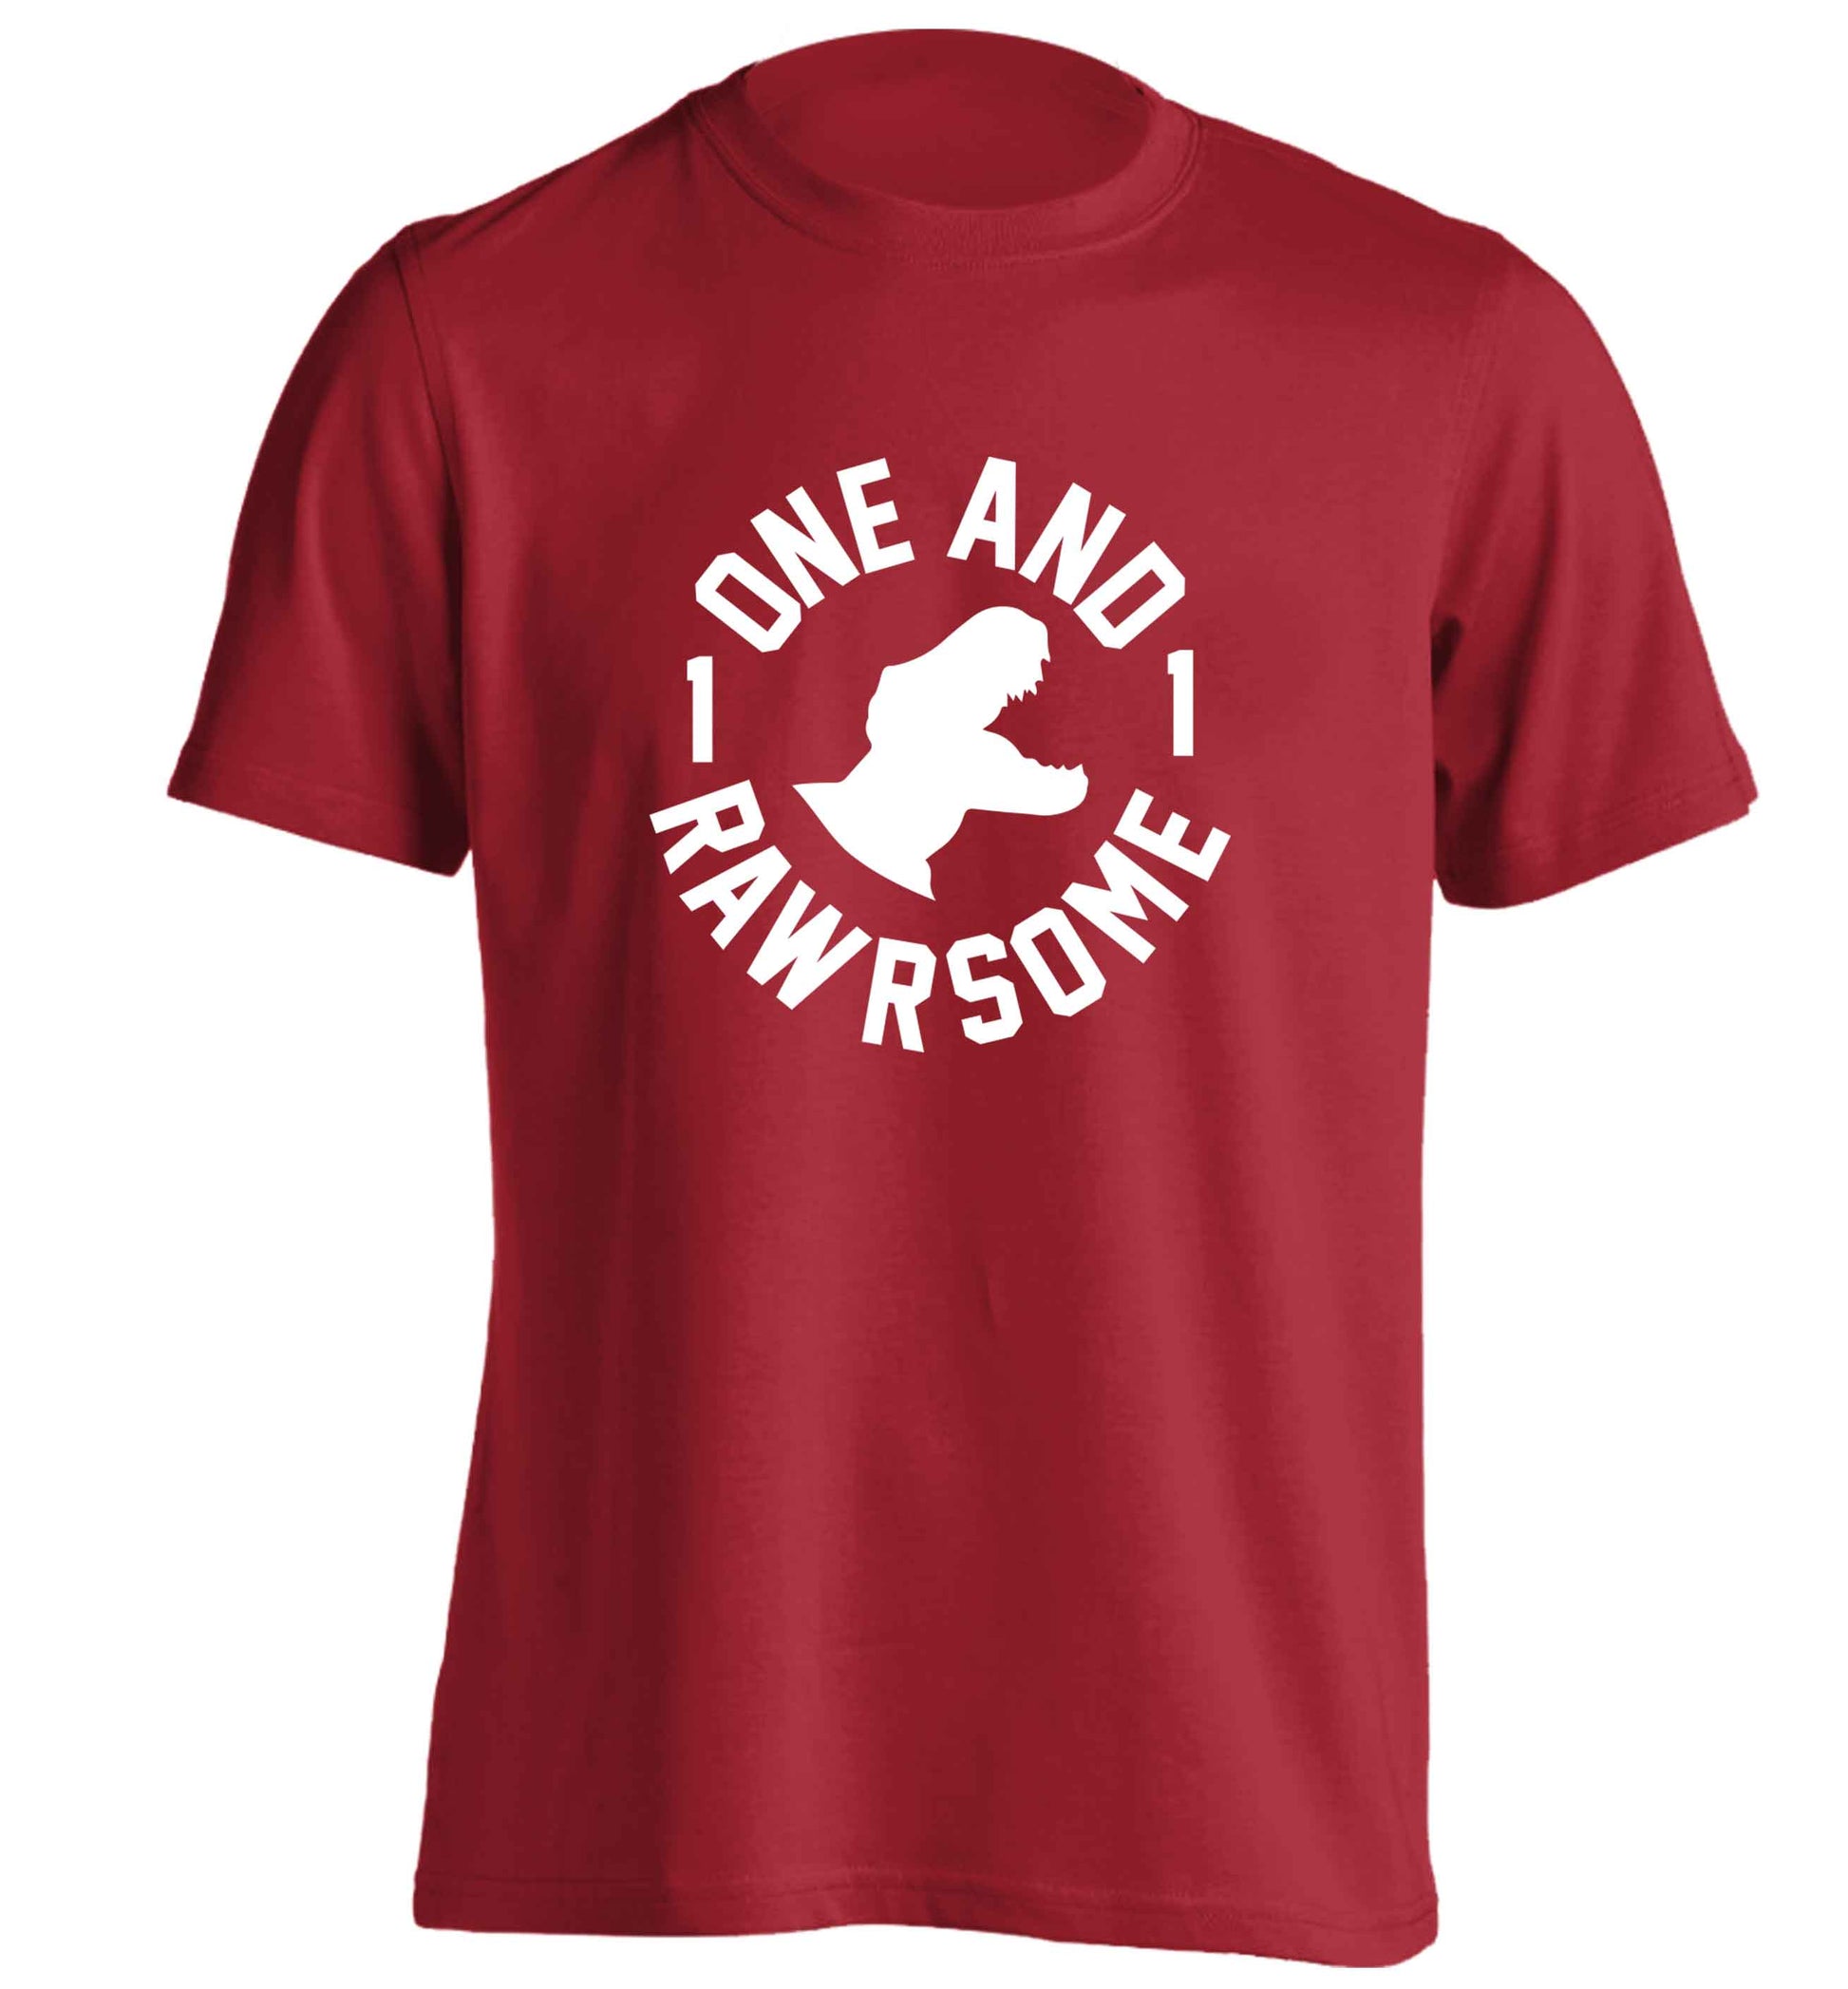 One and Rawrsome adults unisex red Tshirt 2XL